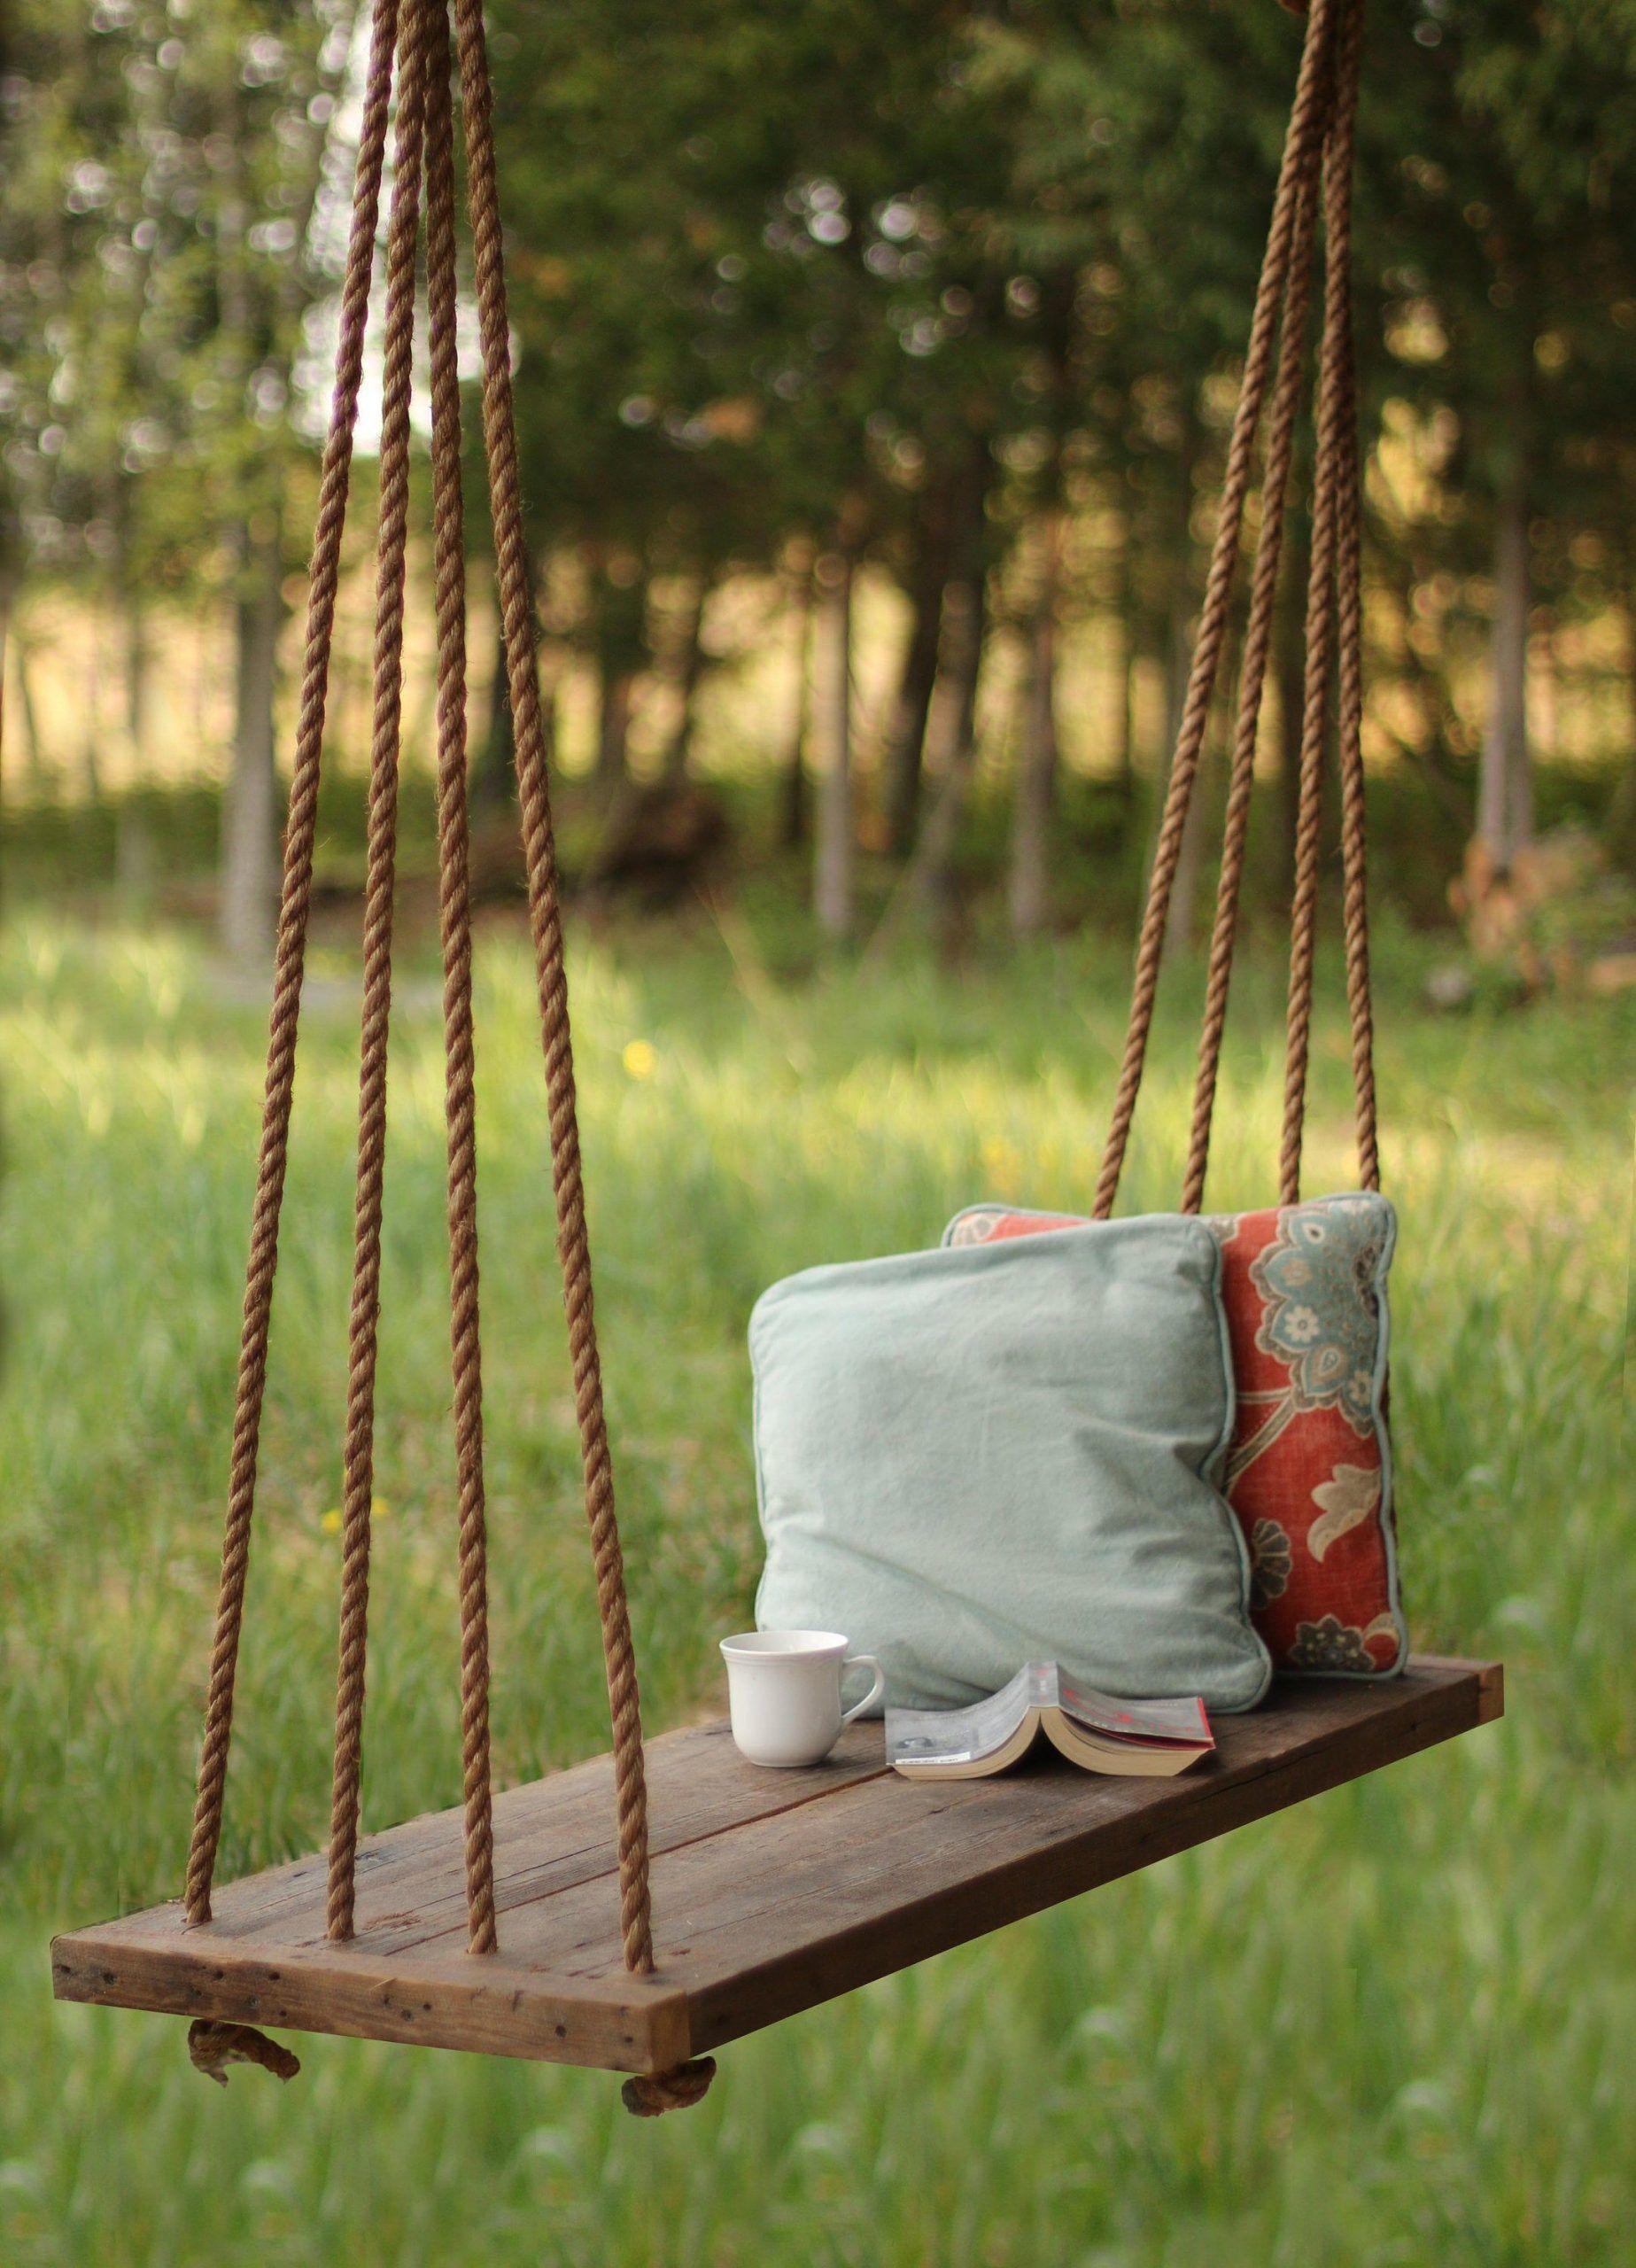 Porch Swing / Bench - Outdoor Seating - Rope Swing - Tree Swing - Porch Swing / Bench - Outdoor Seating - Rope Swing - Tree Swing -   16 diy Outdoor swing ideas